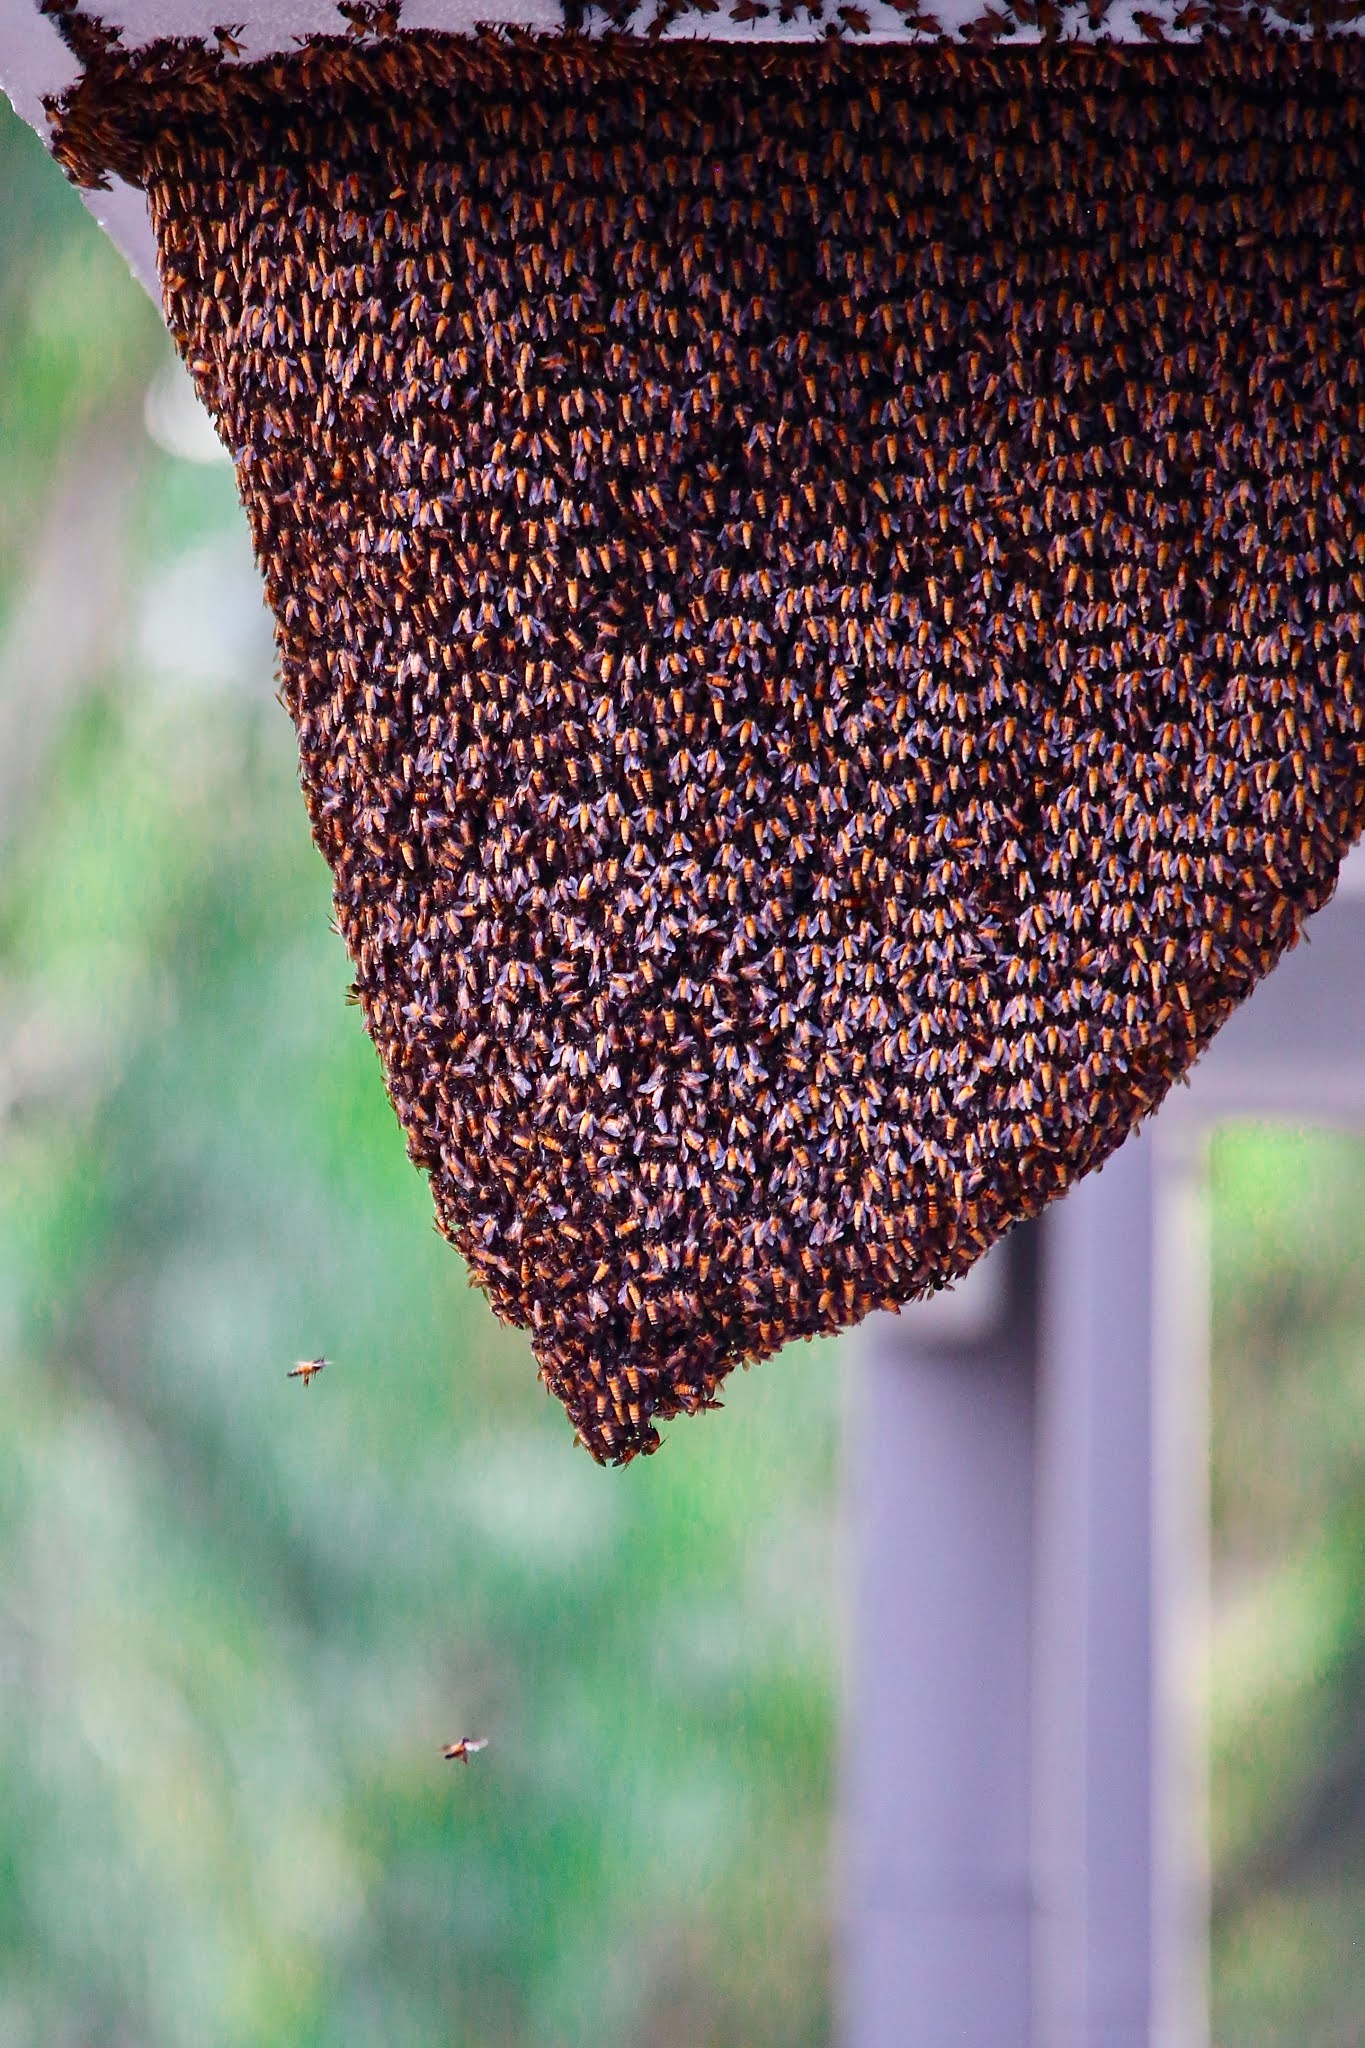 Honey Bees hive high resolution free